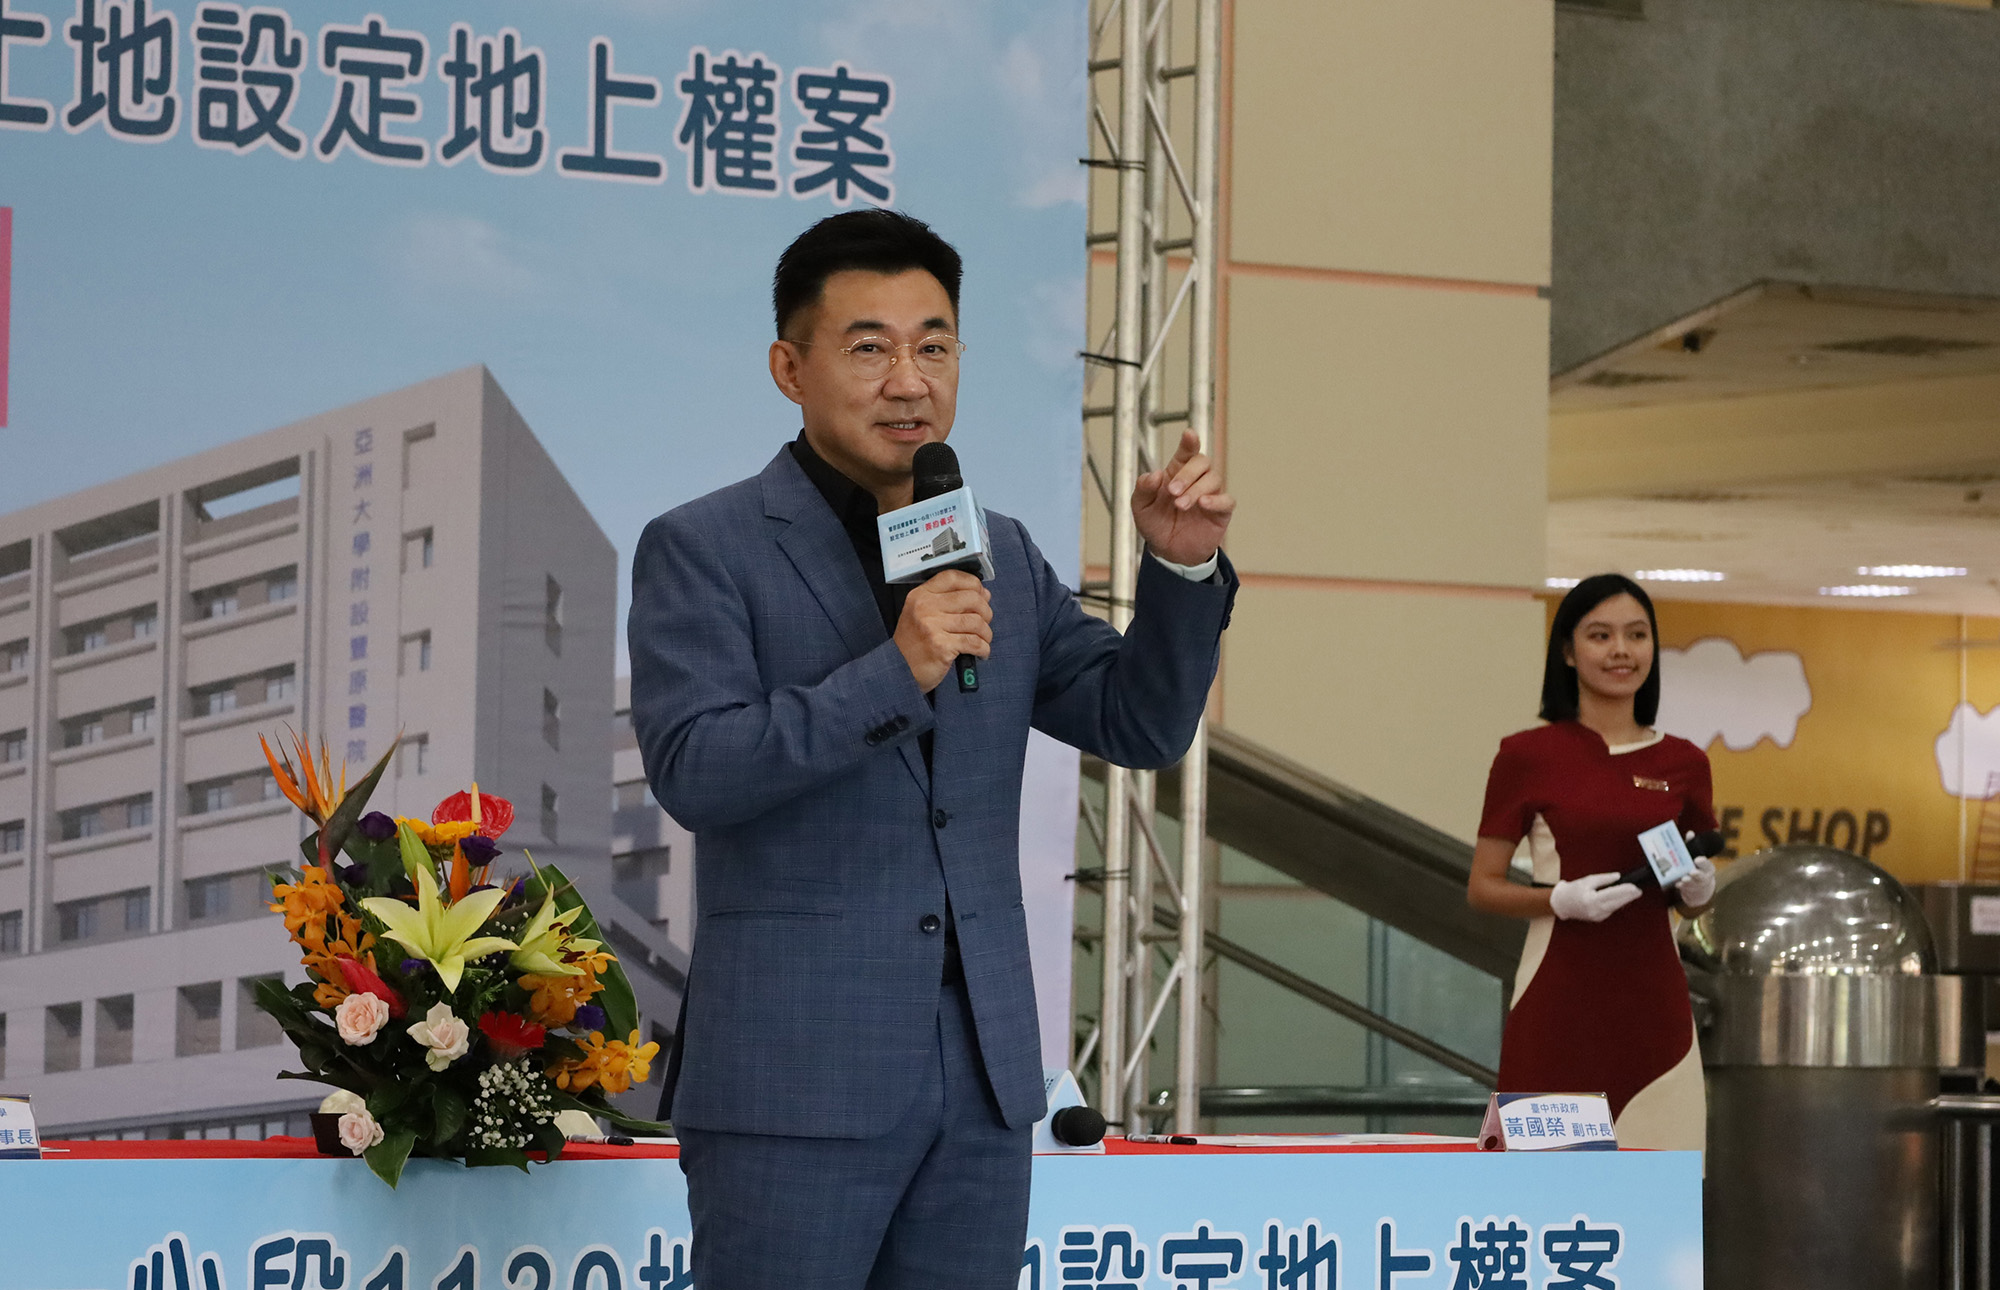 Legislator Johnny Chi-Chen Chiang stated that during his 12 years as a legislator, he has eagerly anticipated the implementation and development of the "Fengfu Project", recognizing its significant significance for Fengyuan with a symbolic impact.